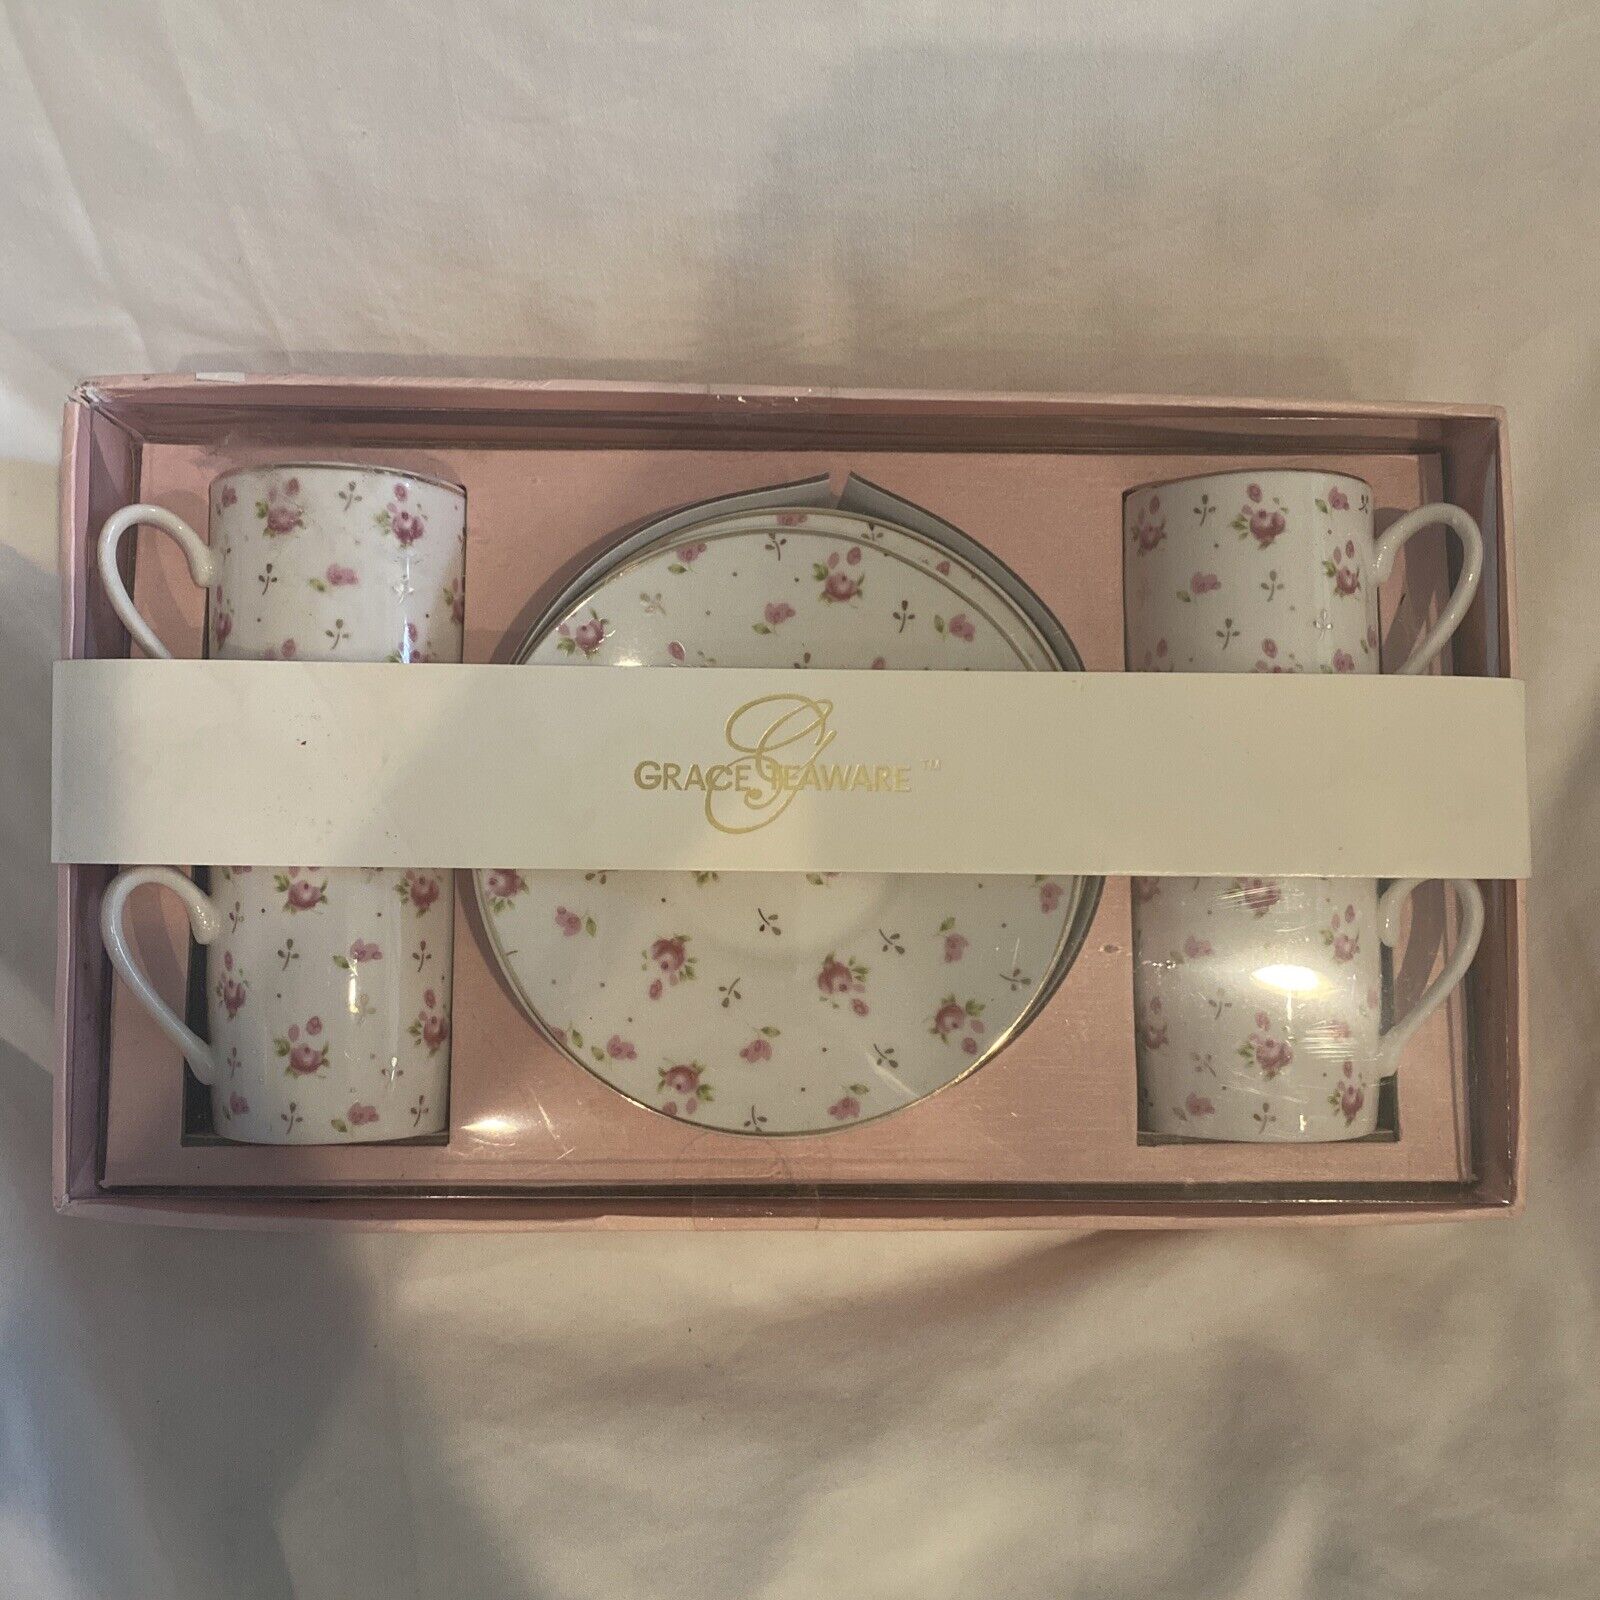 Grace's Teaware 8 Piece Tea Cup and Saucer Set Pink and White Rose Pattern